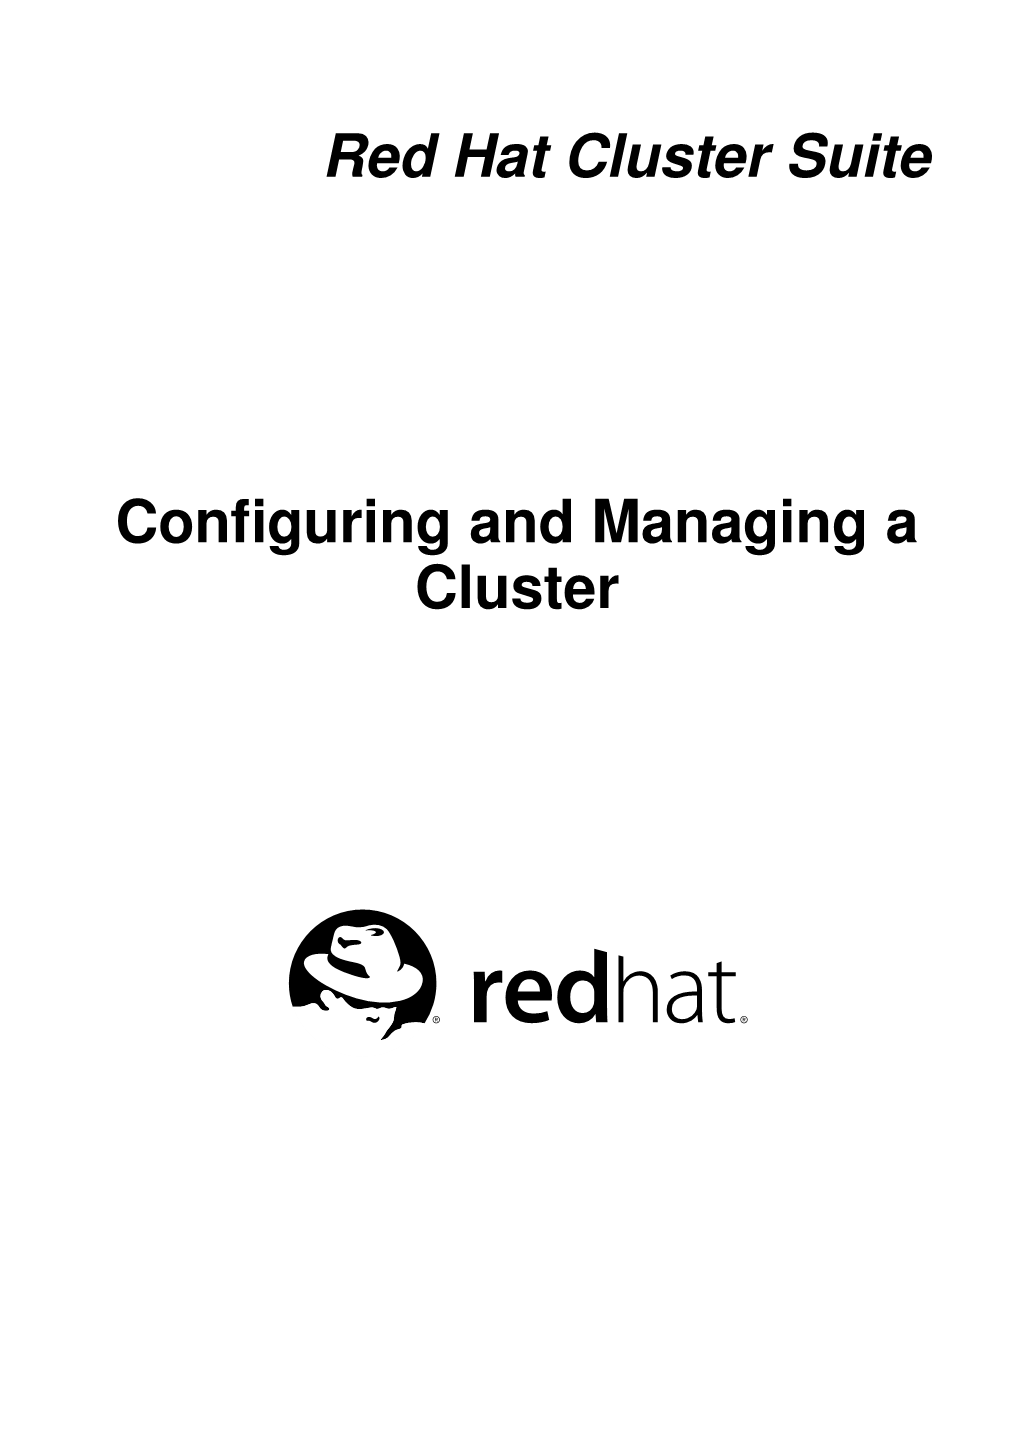 Red Hat Cluster Suite Configuring and Managing a Cluster